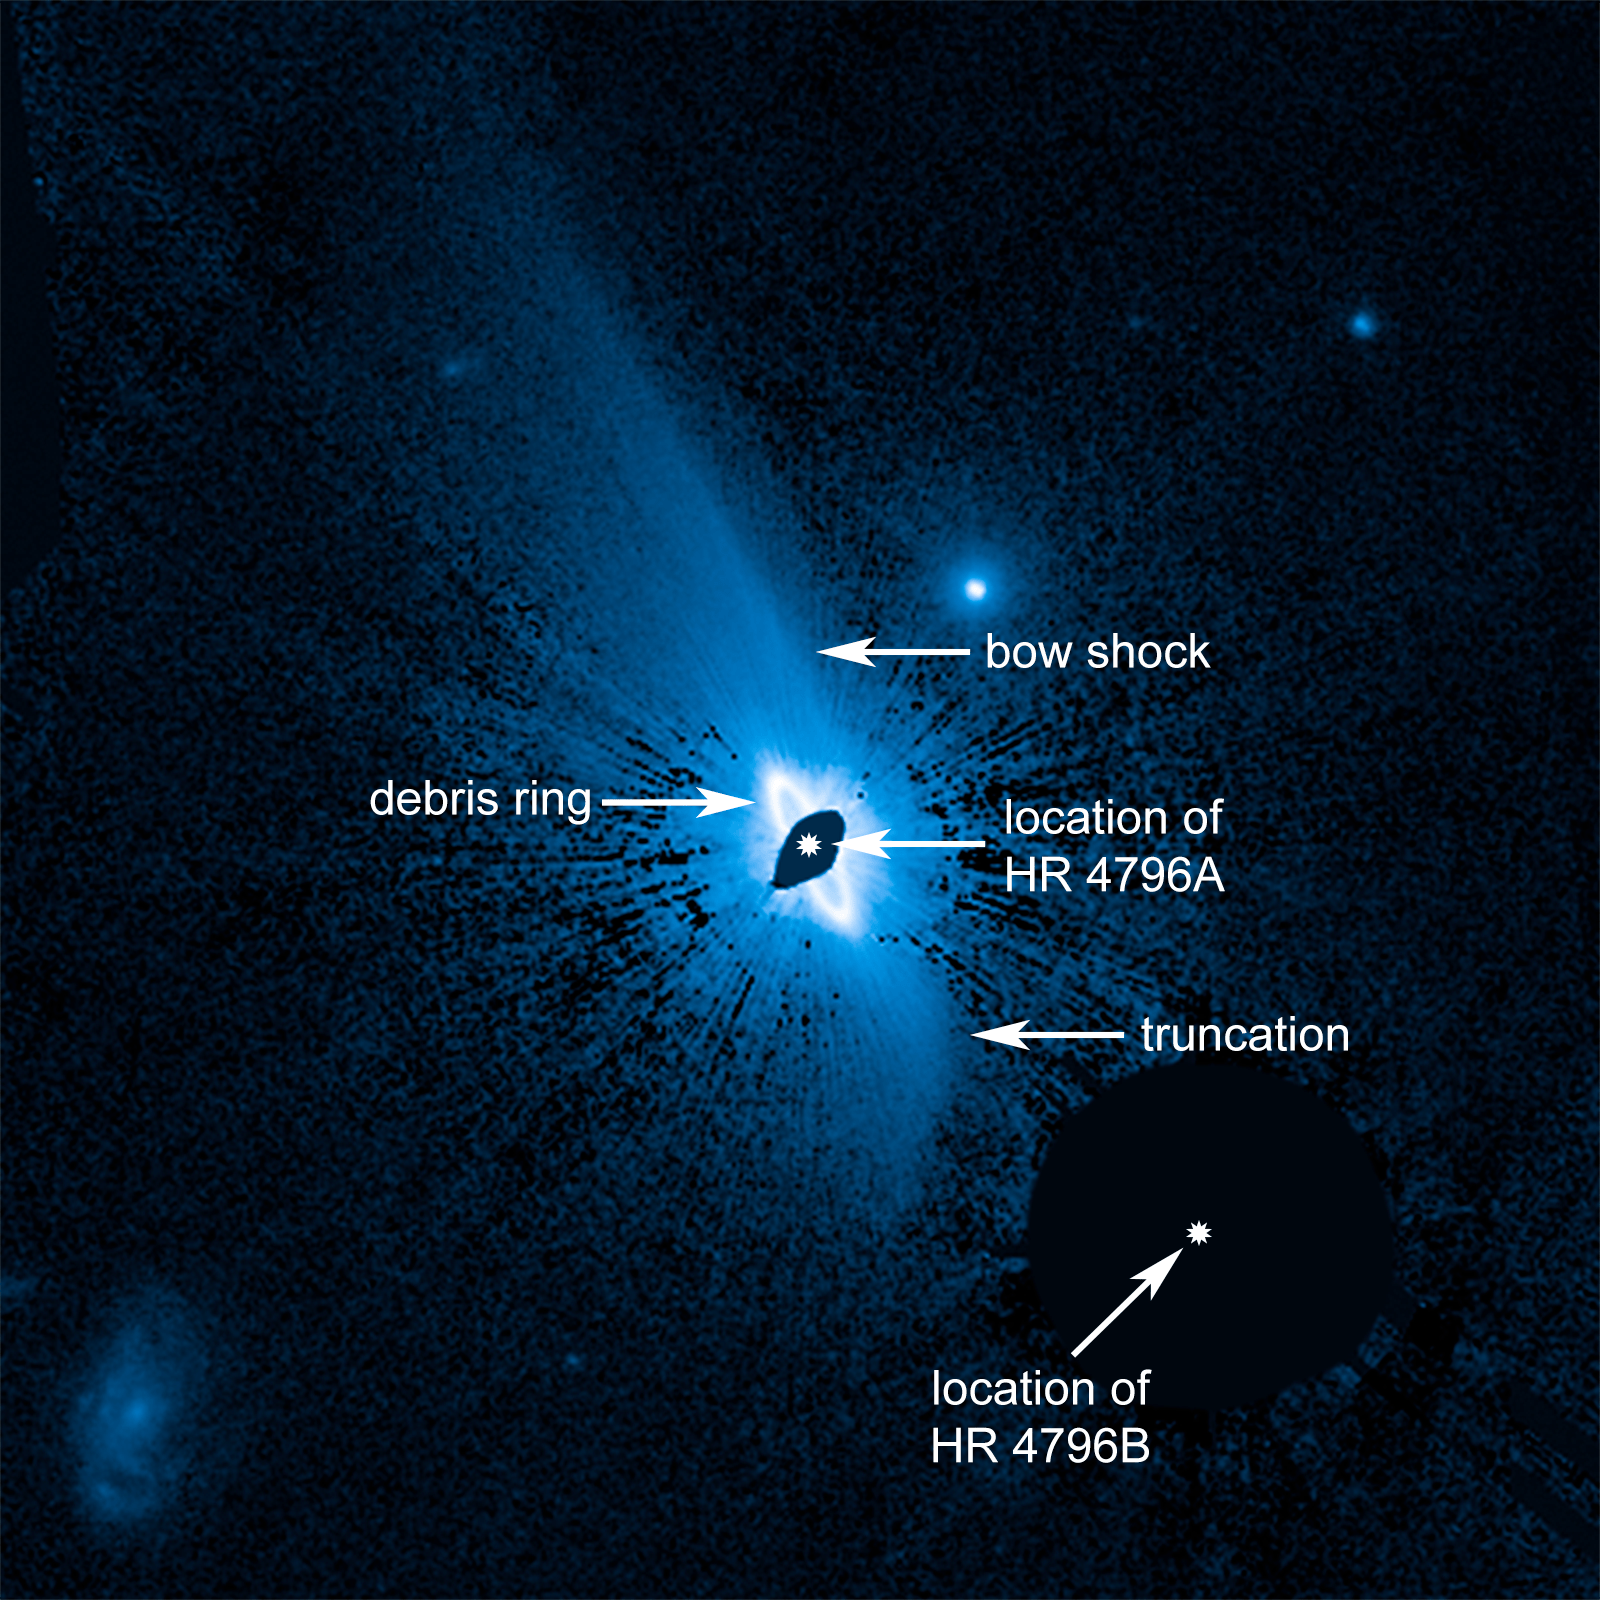 One of the targets Webb will study is the well-known, giant ring of dust and planetesimals orbiting a young star called HR 4796A